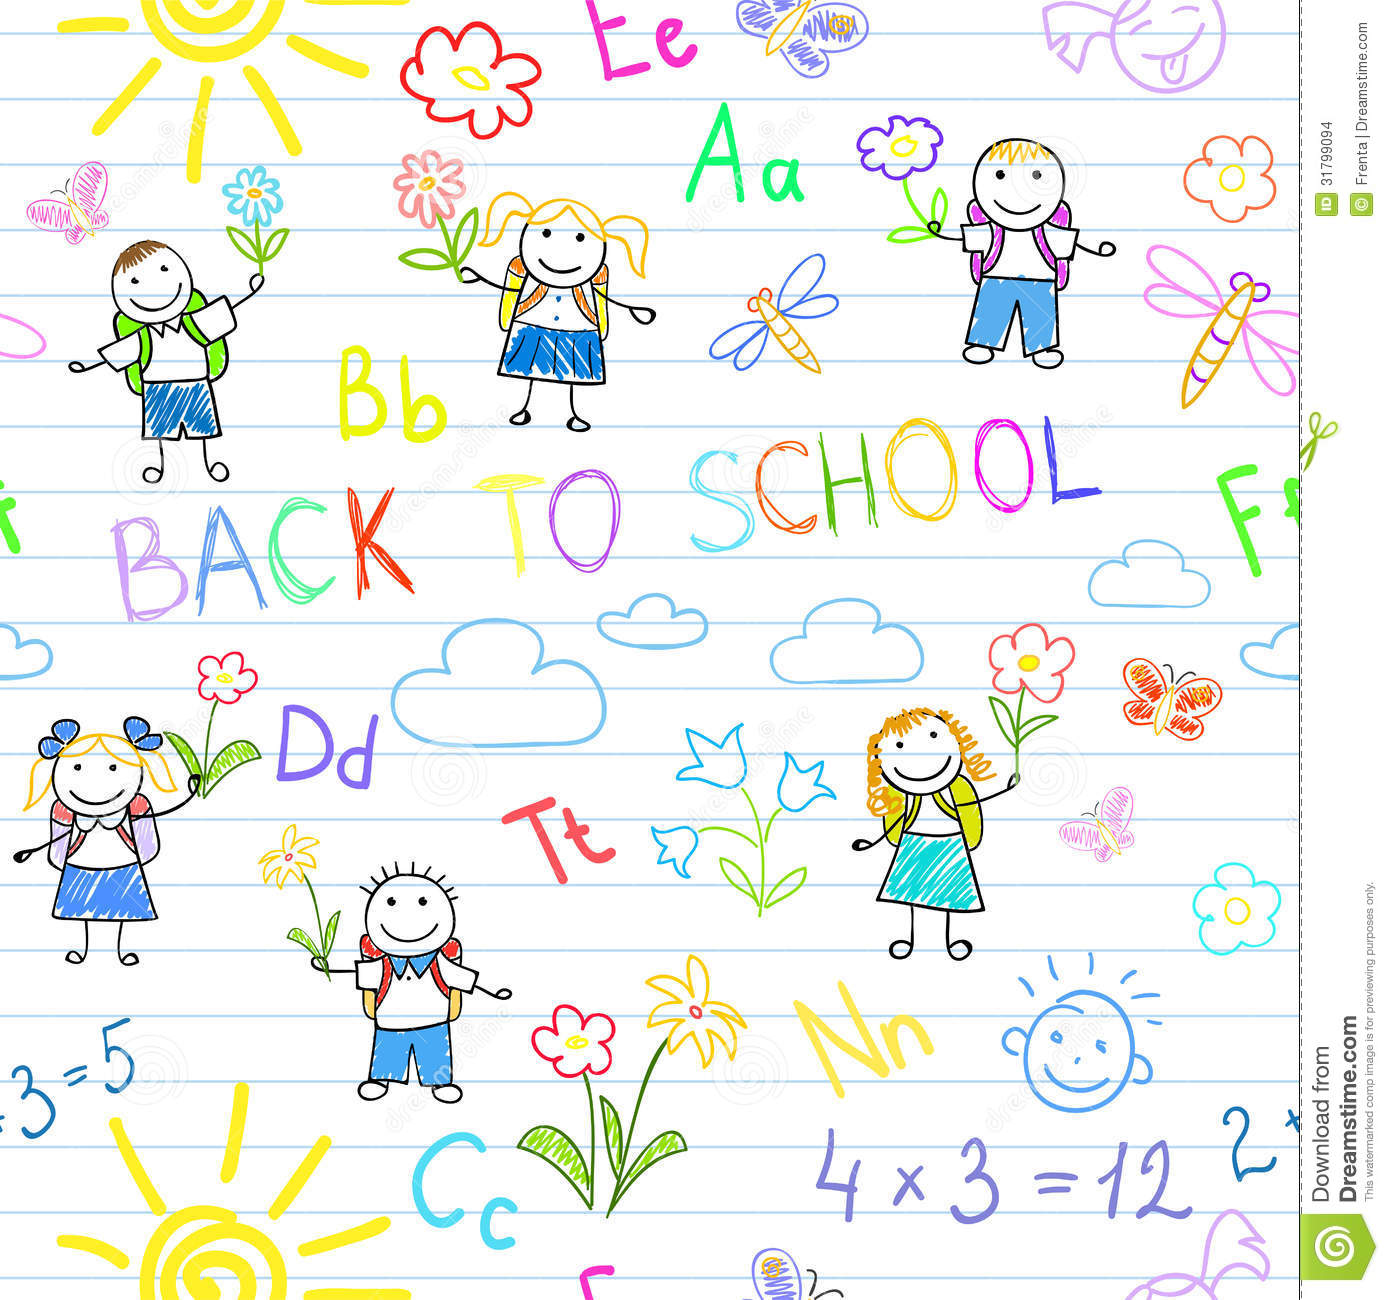 Back To School Background Stock Image